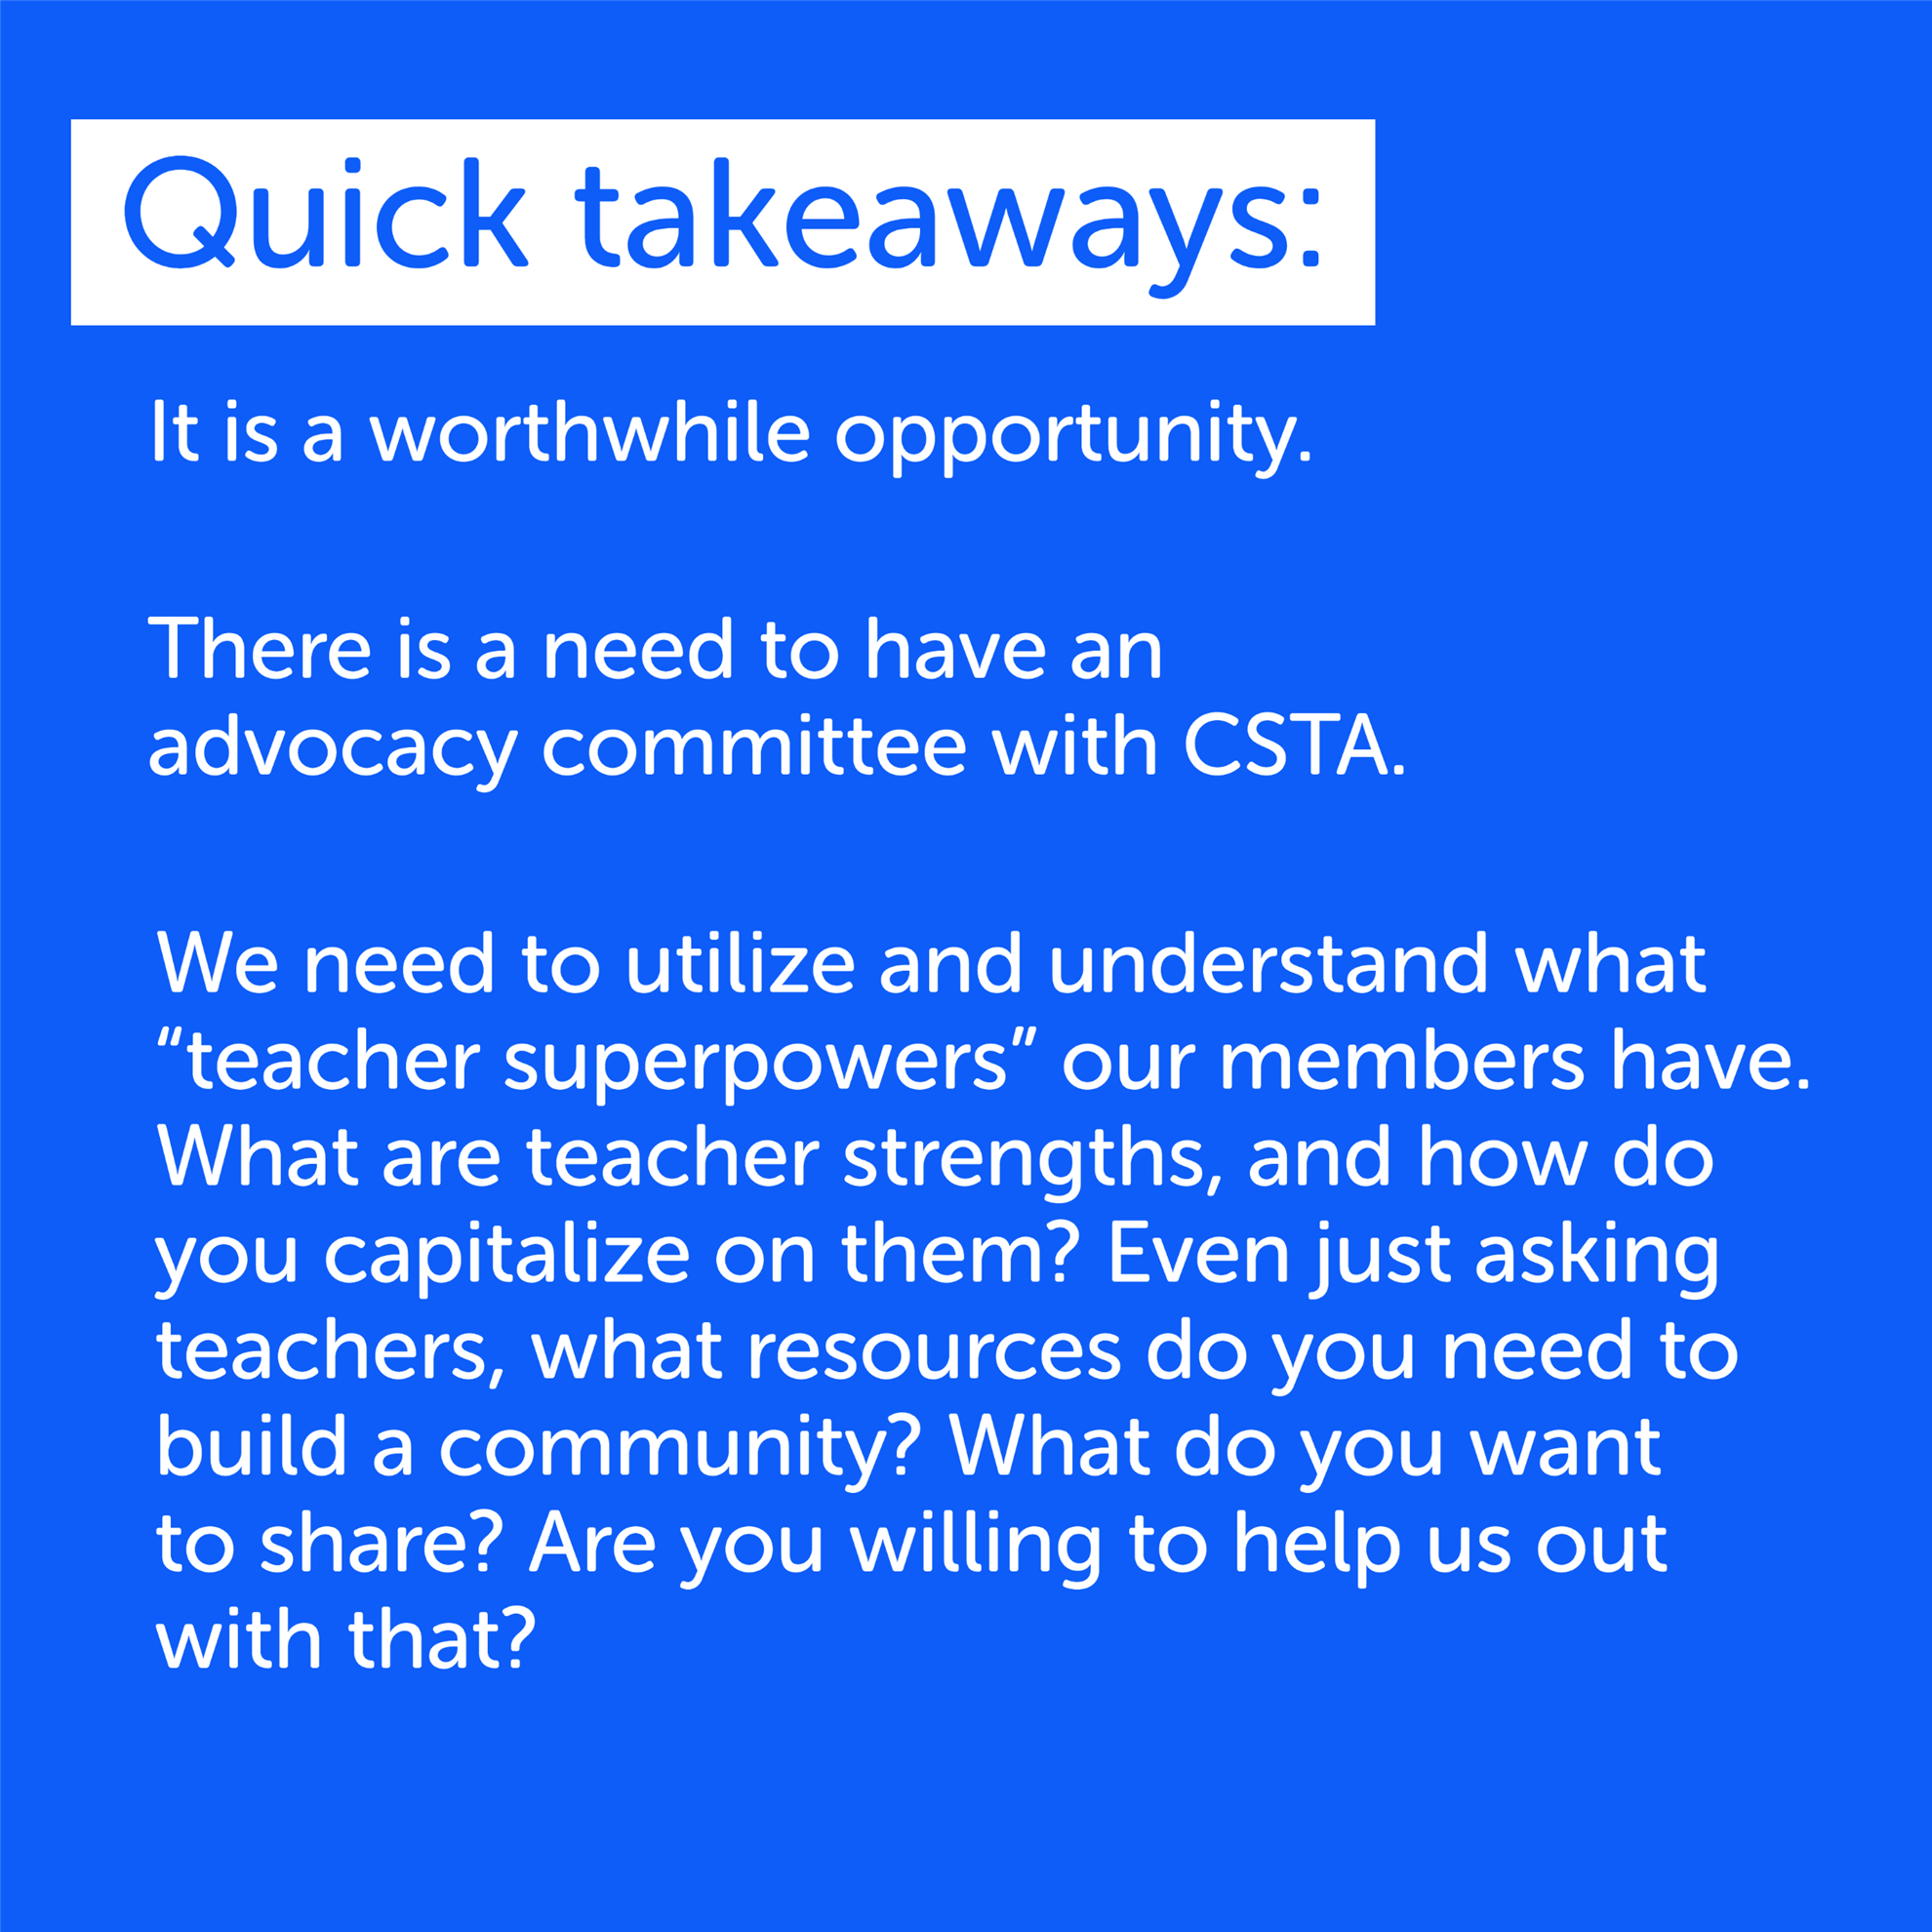 Quick takeaways: 
It is a worthwhile opportunity. 
There is a need to have an advocacy community with CSTA. 
We need to utilize and understand what "teacher superpowers" our members have. What are our teacher strengths, and how do you capitalize on them? Even just asking teachers, what resources do you need to build a community? What do you want to share? Are you willing to help us out with that? 